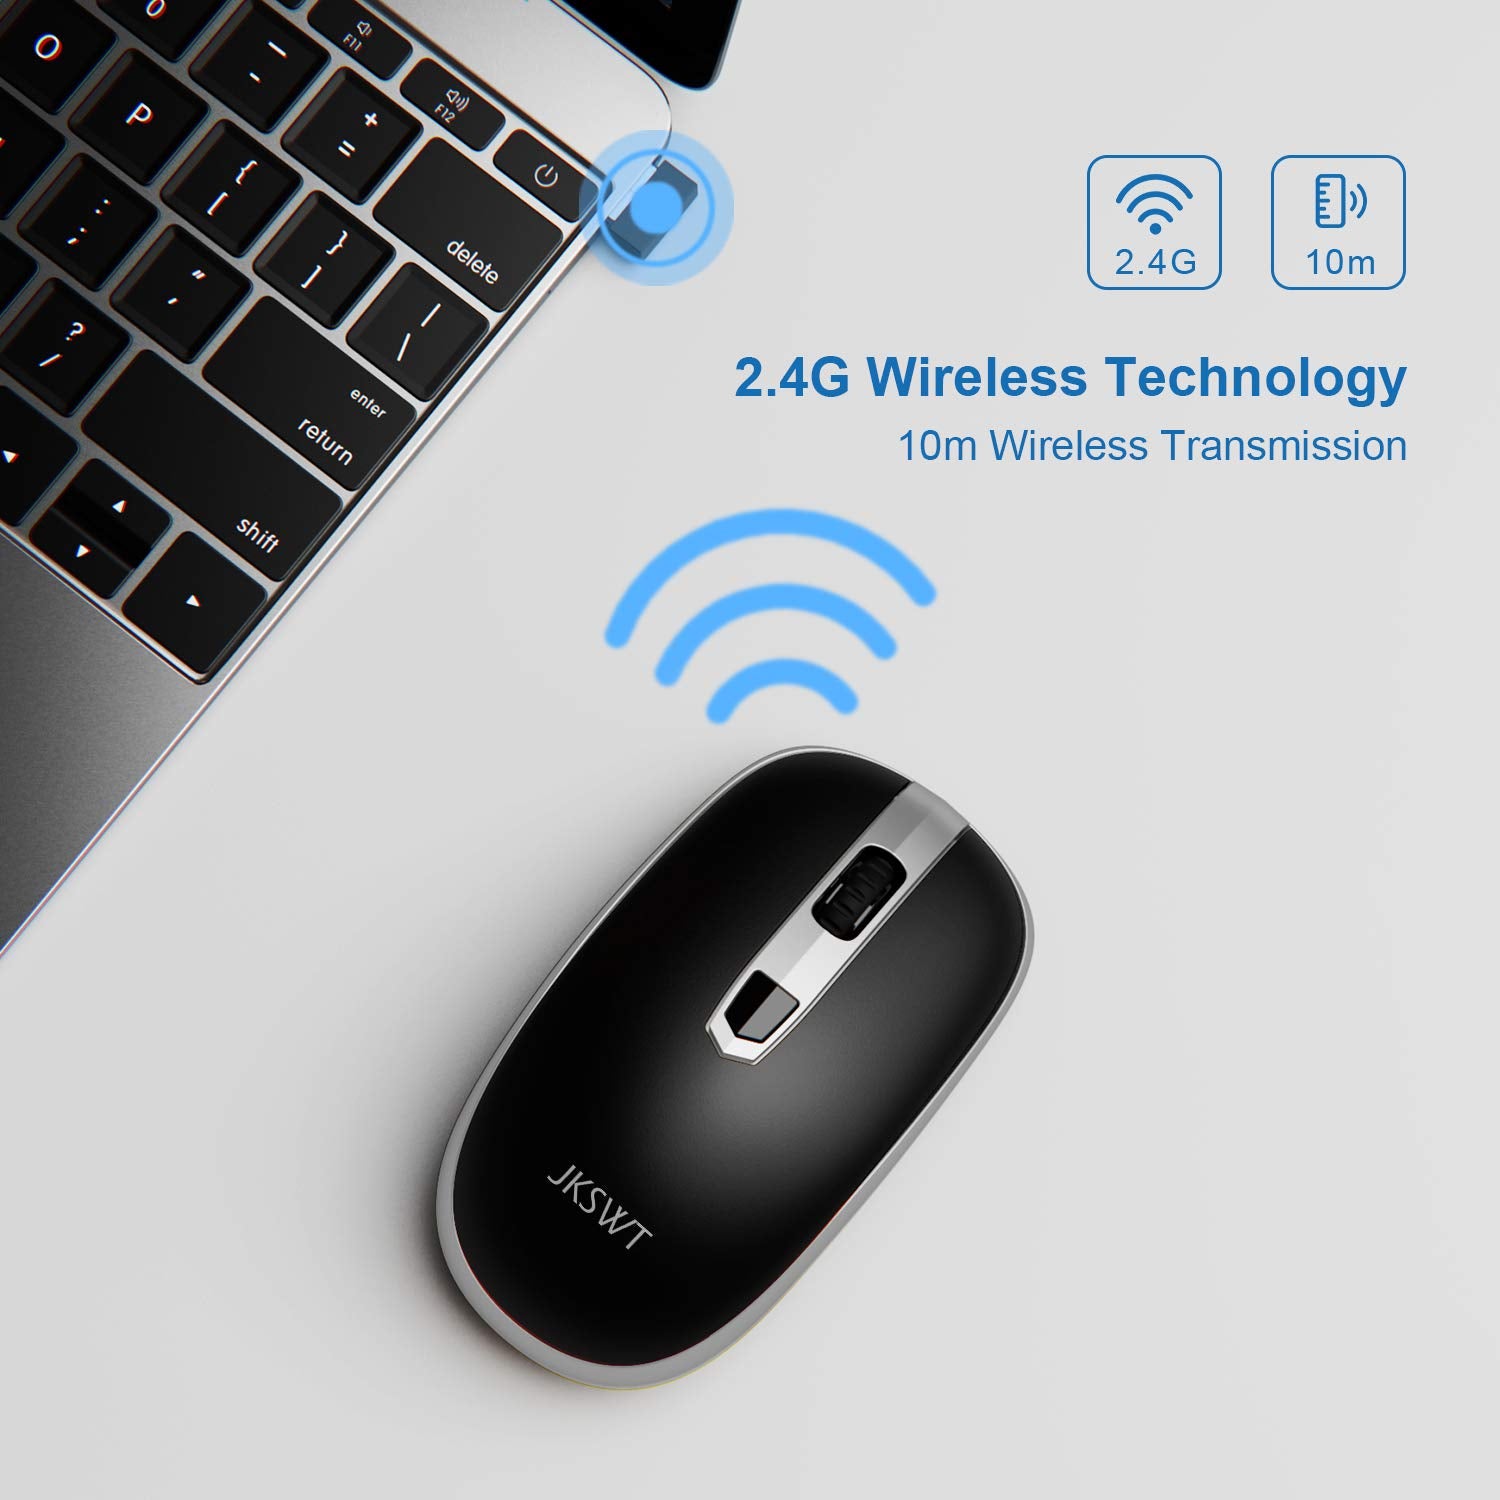 JKSWT Wireless Mouse, 2.4G Portable Computer Wireless Mice Ergonomic Mouse with USB Nano Receiver ,4 Buttons,1600DPI with 3 Adjustable Levels, Cordless Mouse for PC / Laptop / Mac / Windows